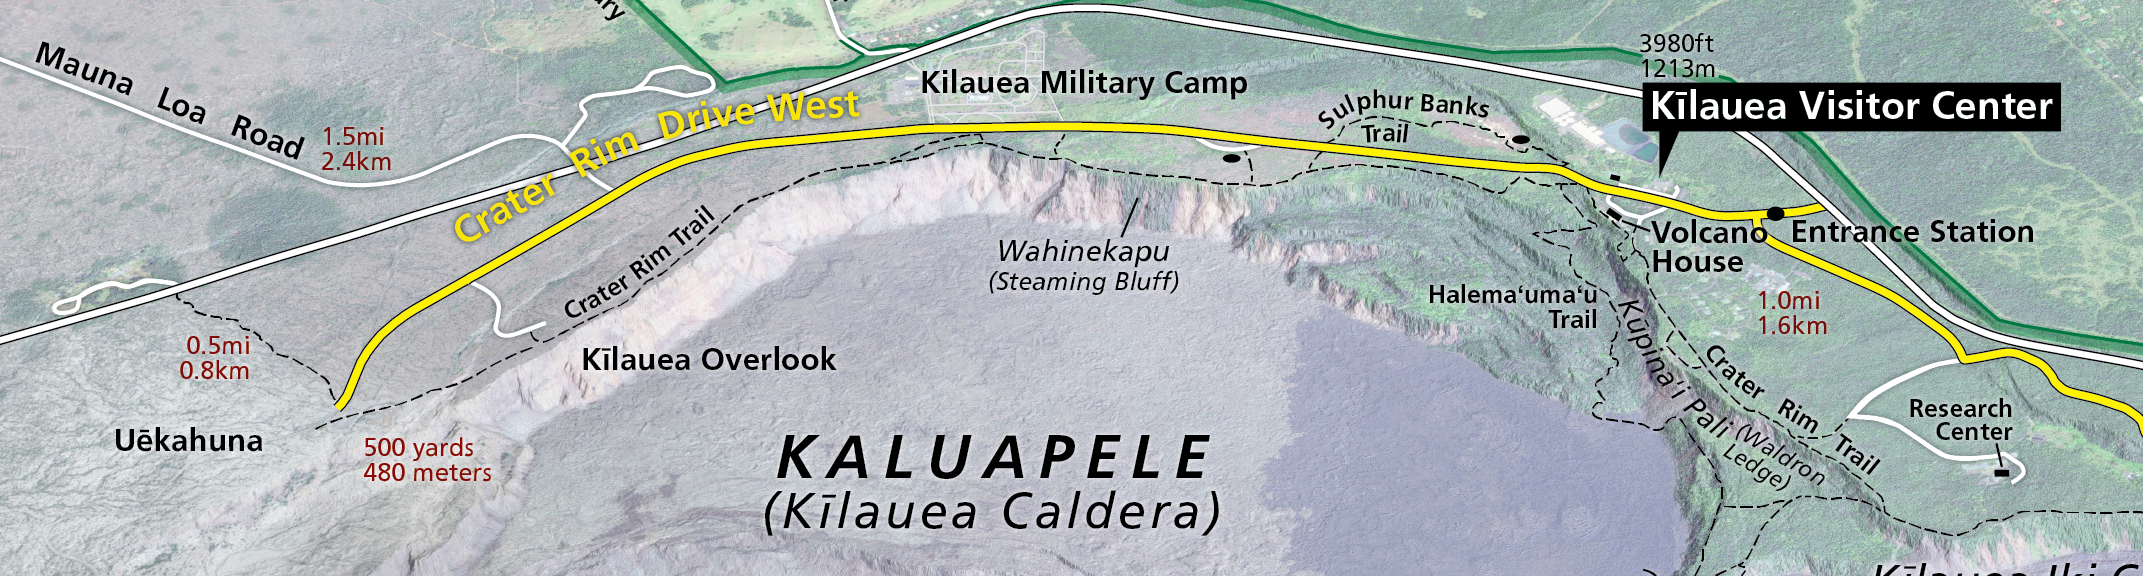 A park map of the summit region of the park showing Crater Rim Drive.